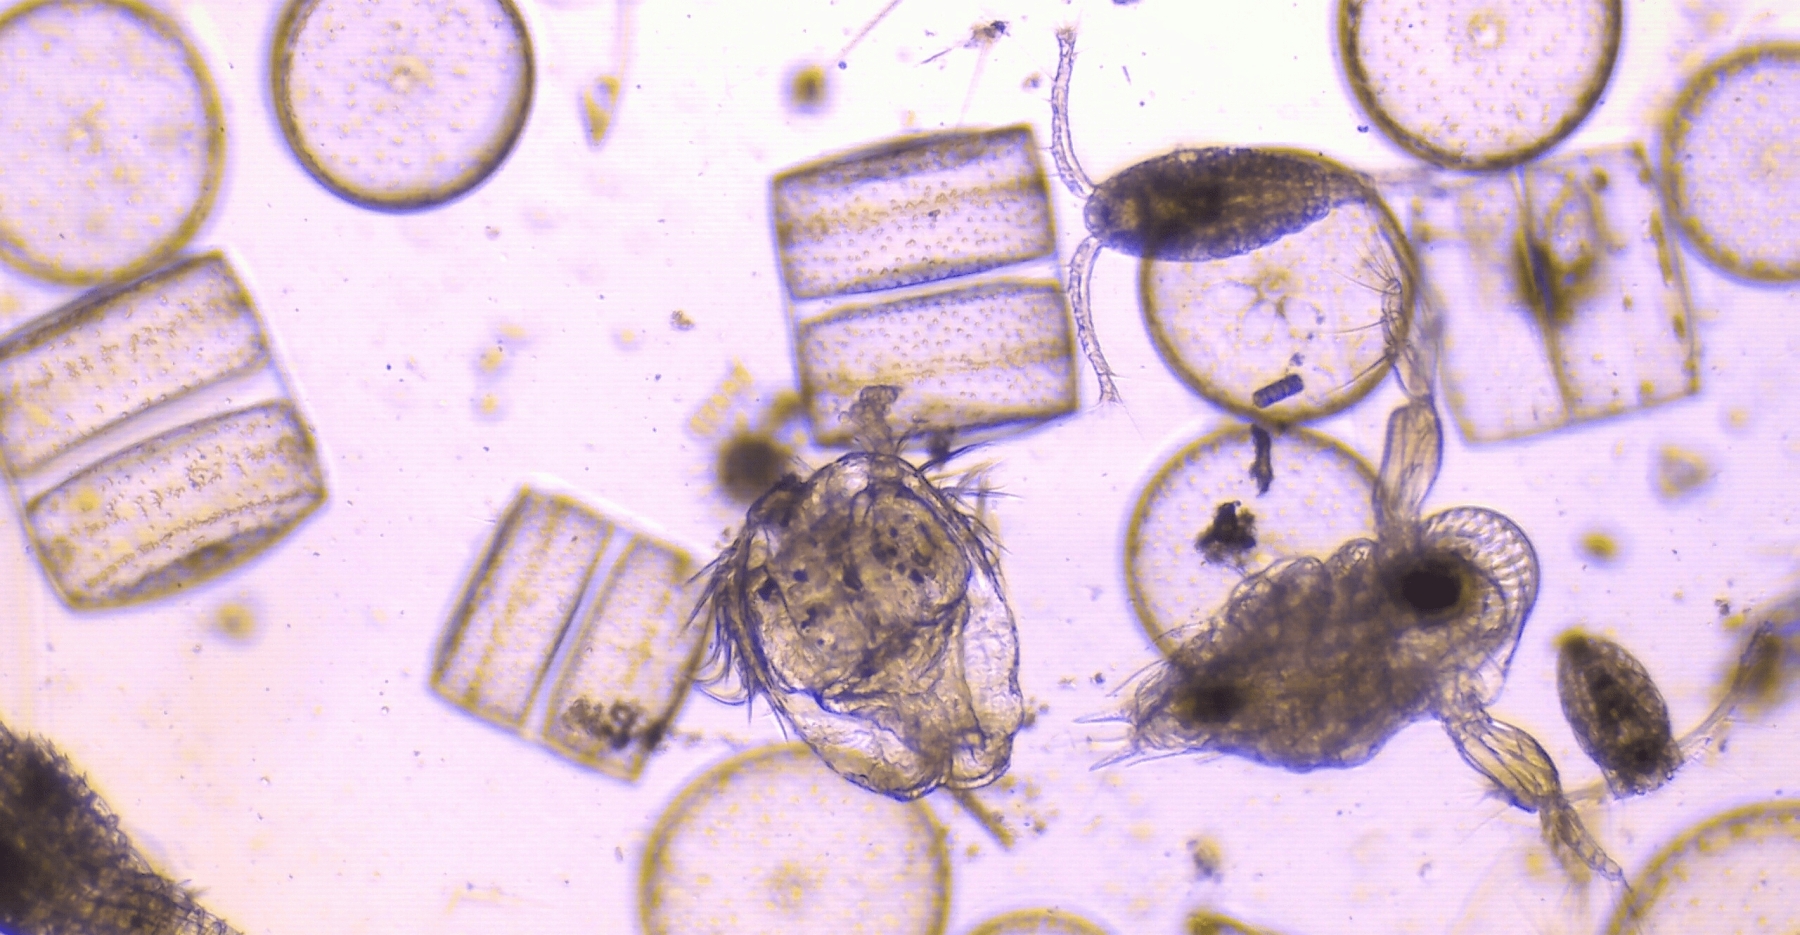 Plankton sample containing centric diatoms and various crustaceans, such as copepods and cladocera. (c) C Braungardt 2023